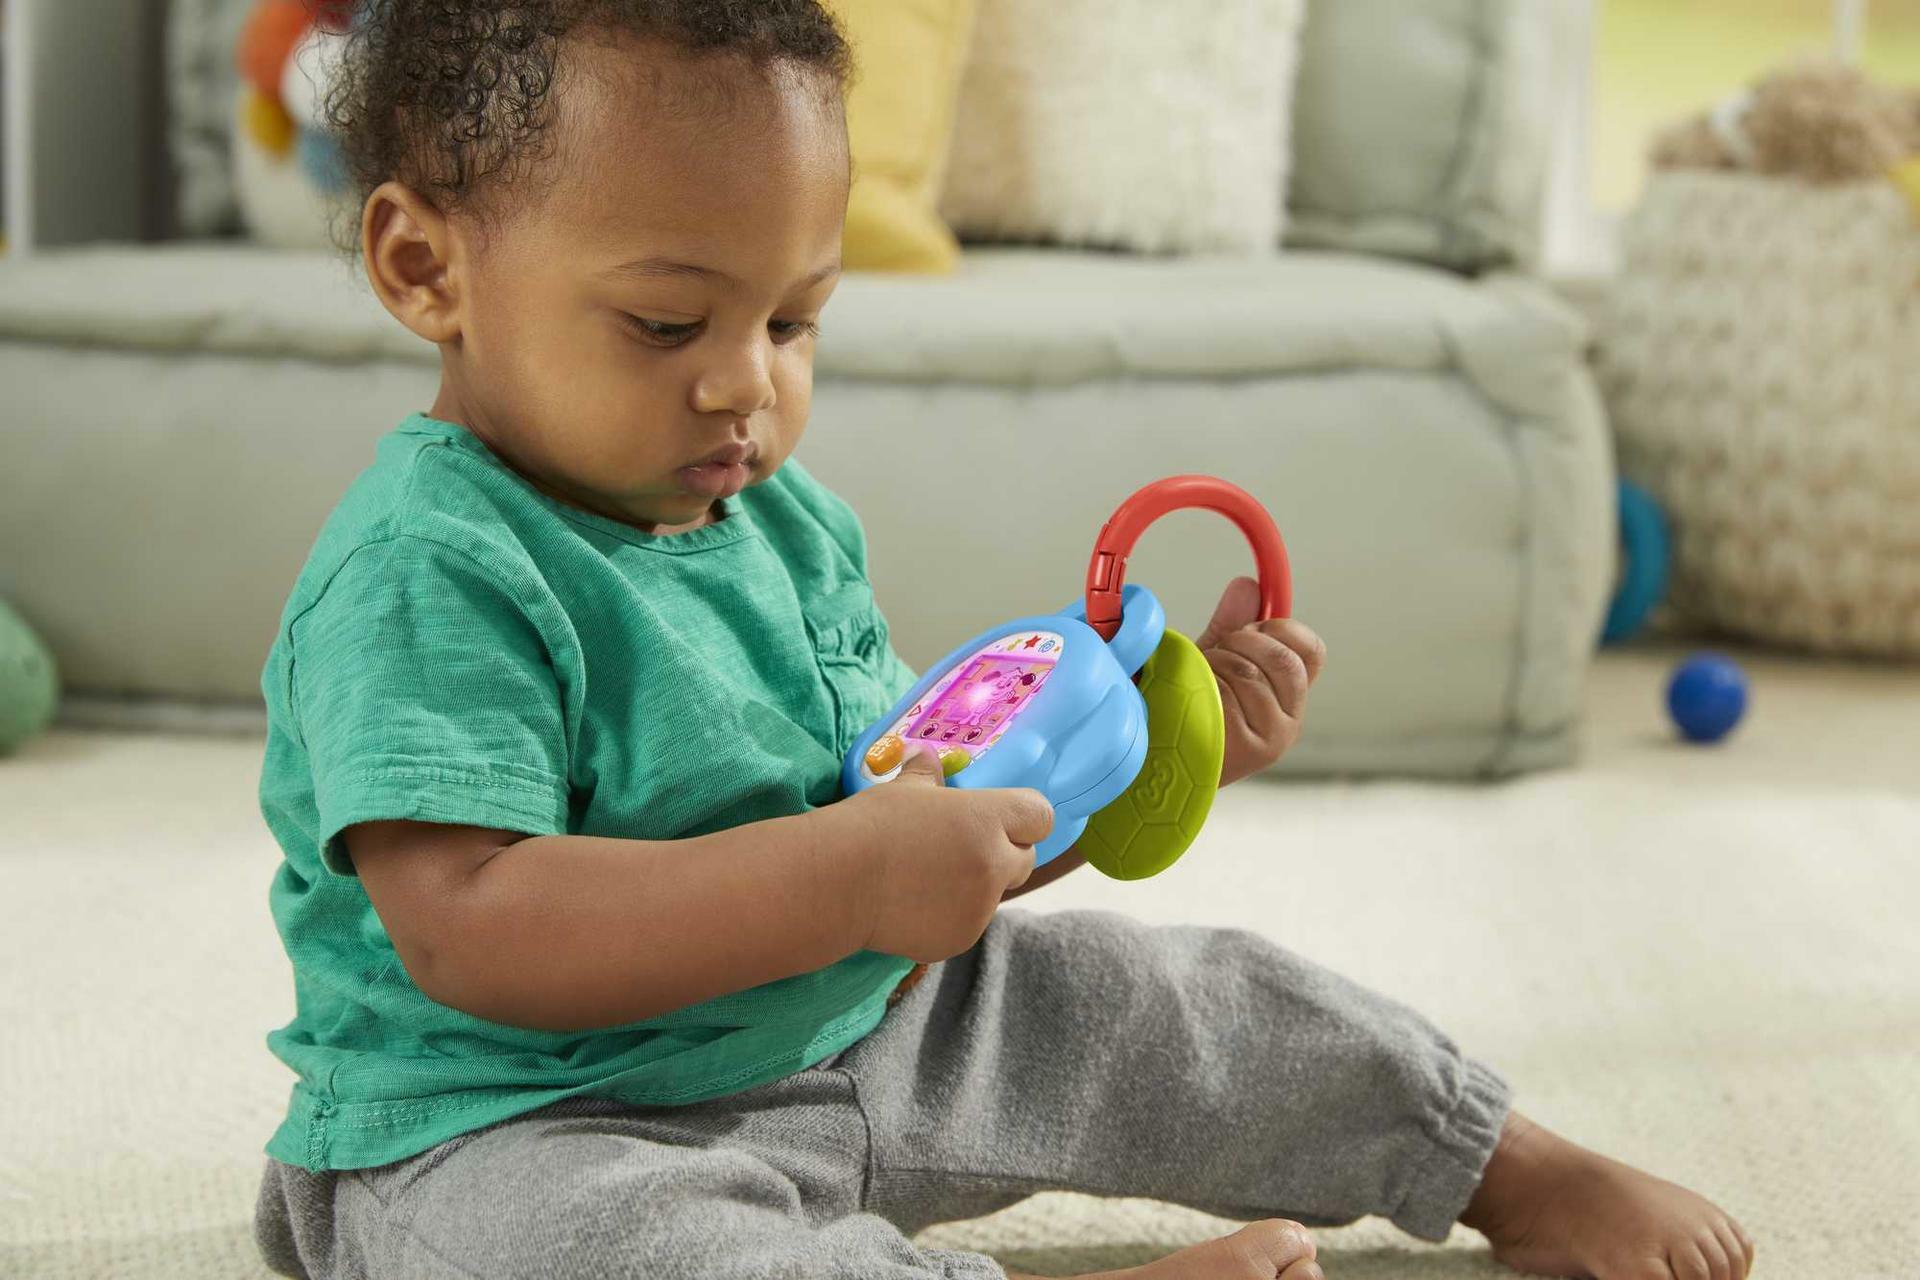 Fisher-Price Laugh & Learn Baby & Toddler Toy DigiPuppy Pretend Digital Pet  with Music & Lights for Ages 6+ Months